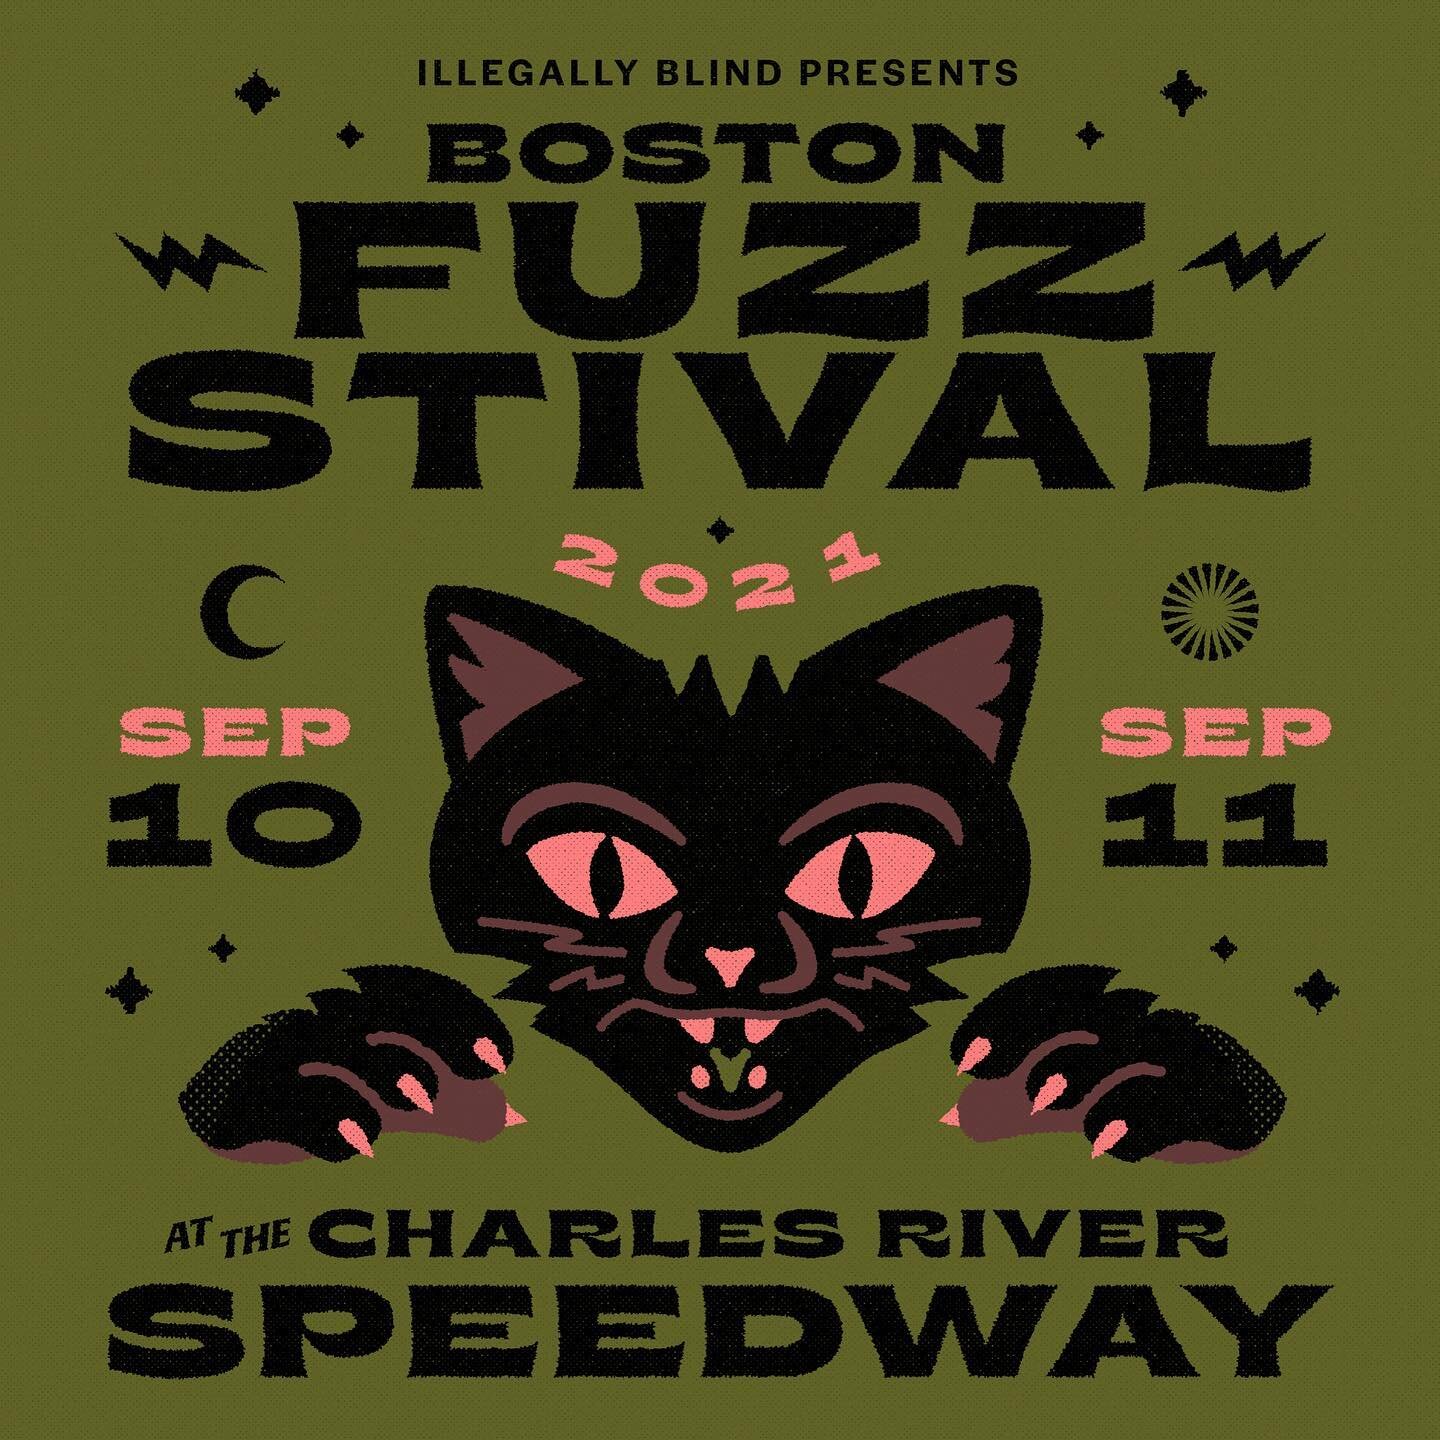 Live music is in your future. Hope to see you there. More band announcements coming soon. Follow @illegallyblindpresents for updates and tickets. #fuzzstival #boston #charlesriverspeedway